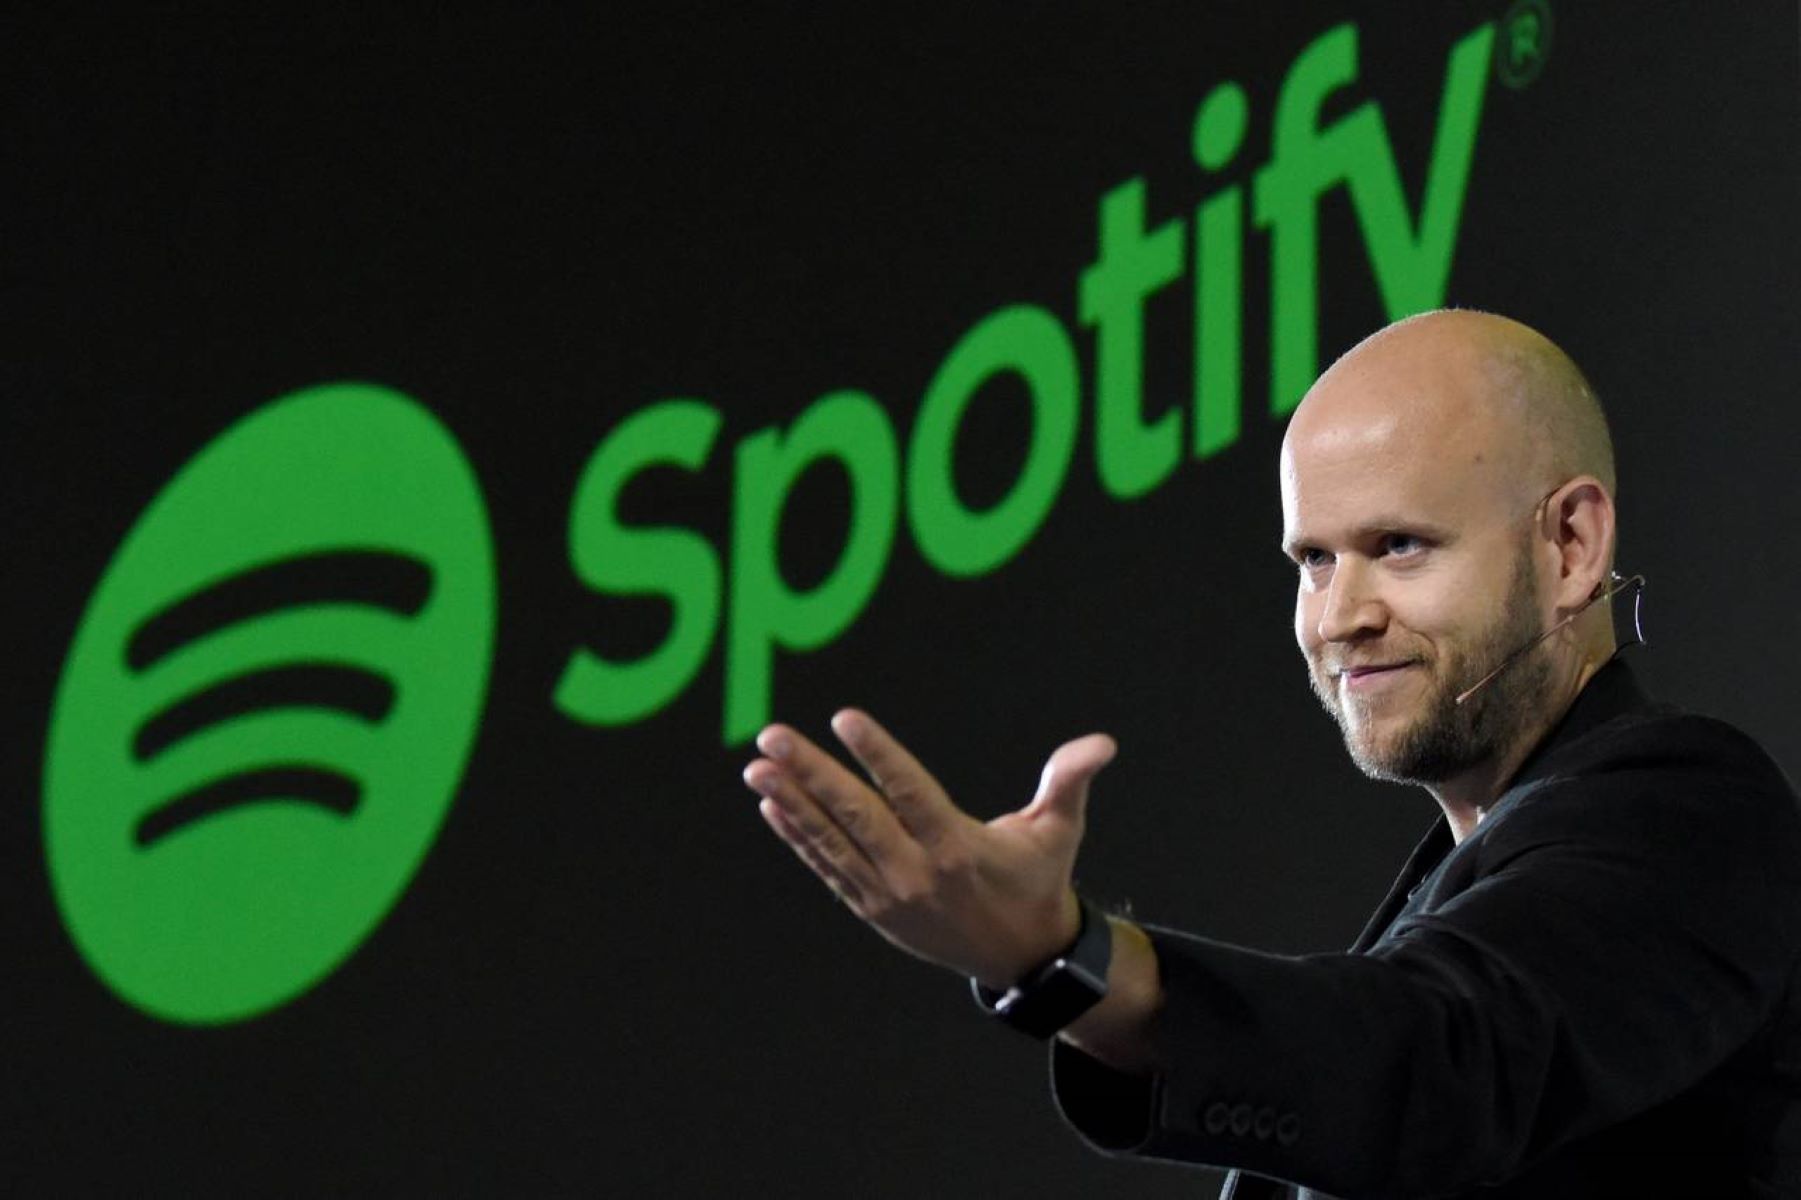 spotify-founder-daniel-ek-reflects-on-the-success-of-discover-weekly-playlist-and-the-power-of-listening